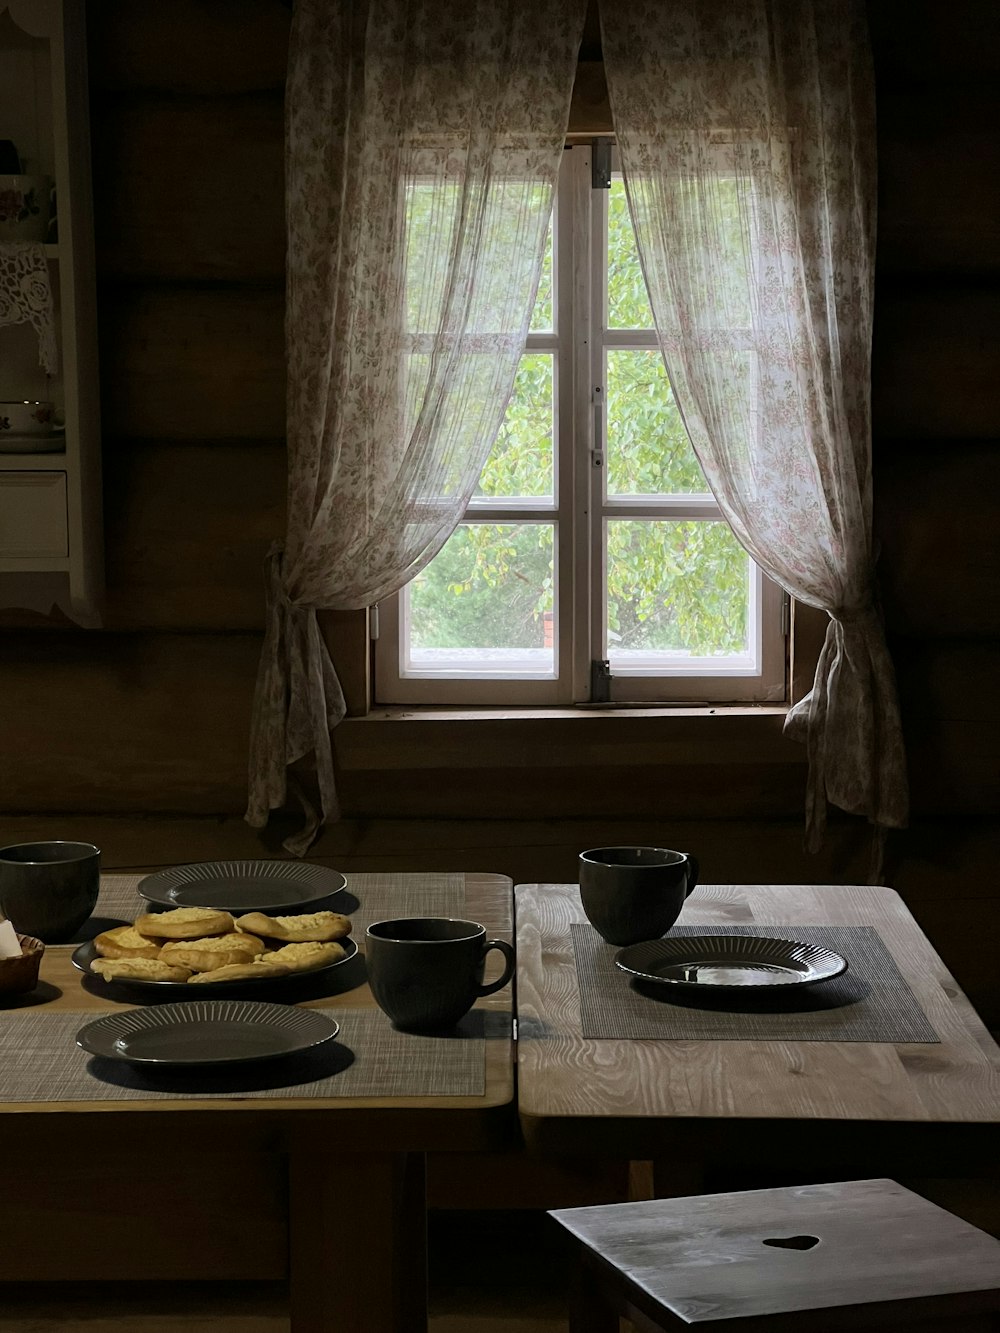 a wooden table topped with plates of food next to a window